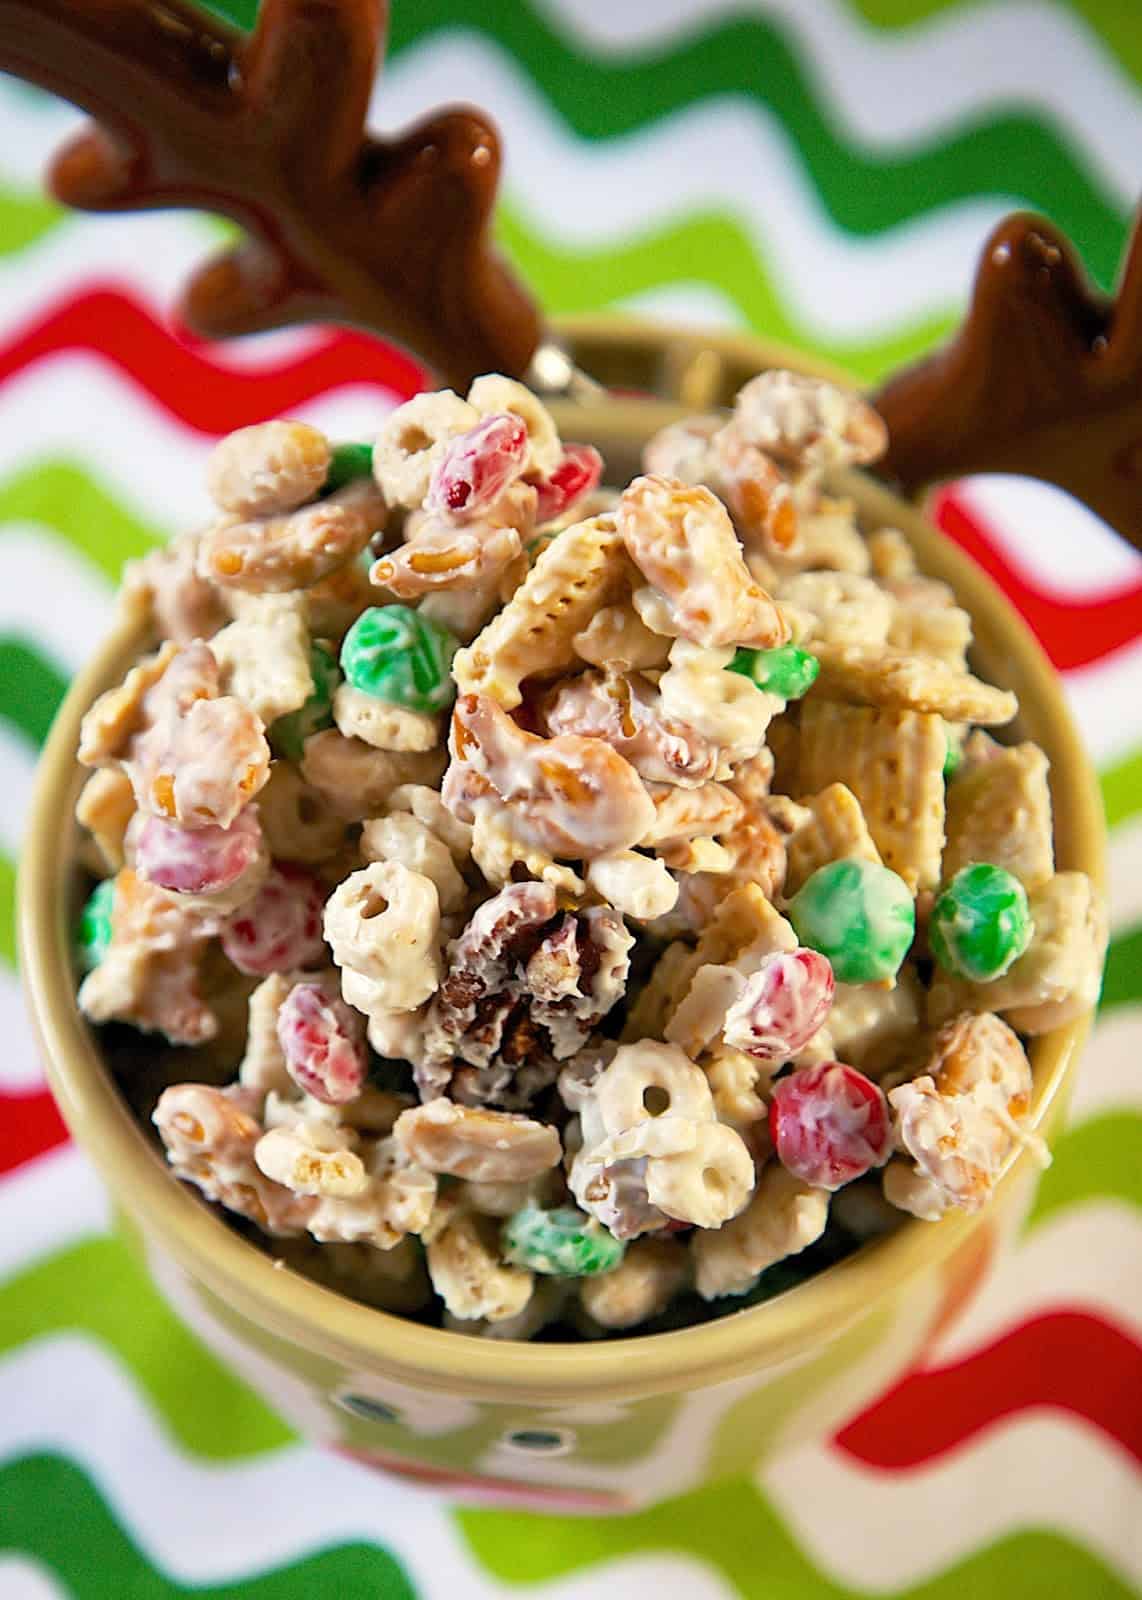 Alton Brown's White Trash Mix - white chocolate chex mix - HIGHLY addictive! Makes great neighbor or co-worker gifts. Chex, mixed nuts, cheerios, m&m candies, pretzels and white chocolate. A must for your holiday dessert tray! Everyone loves this no-bake holiday dessert recipe!